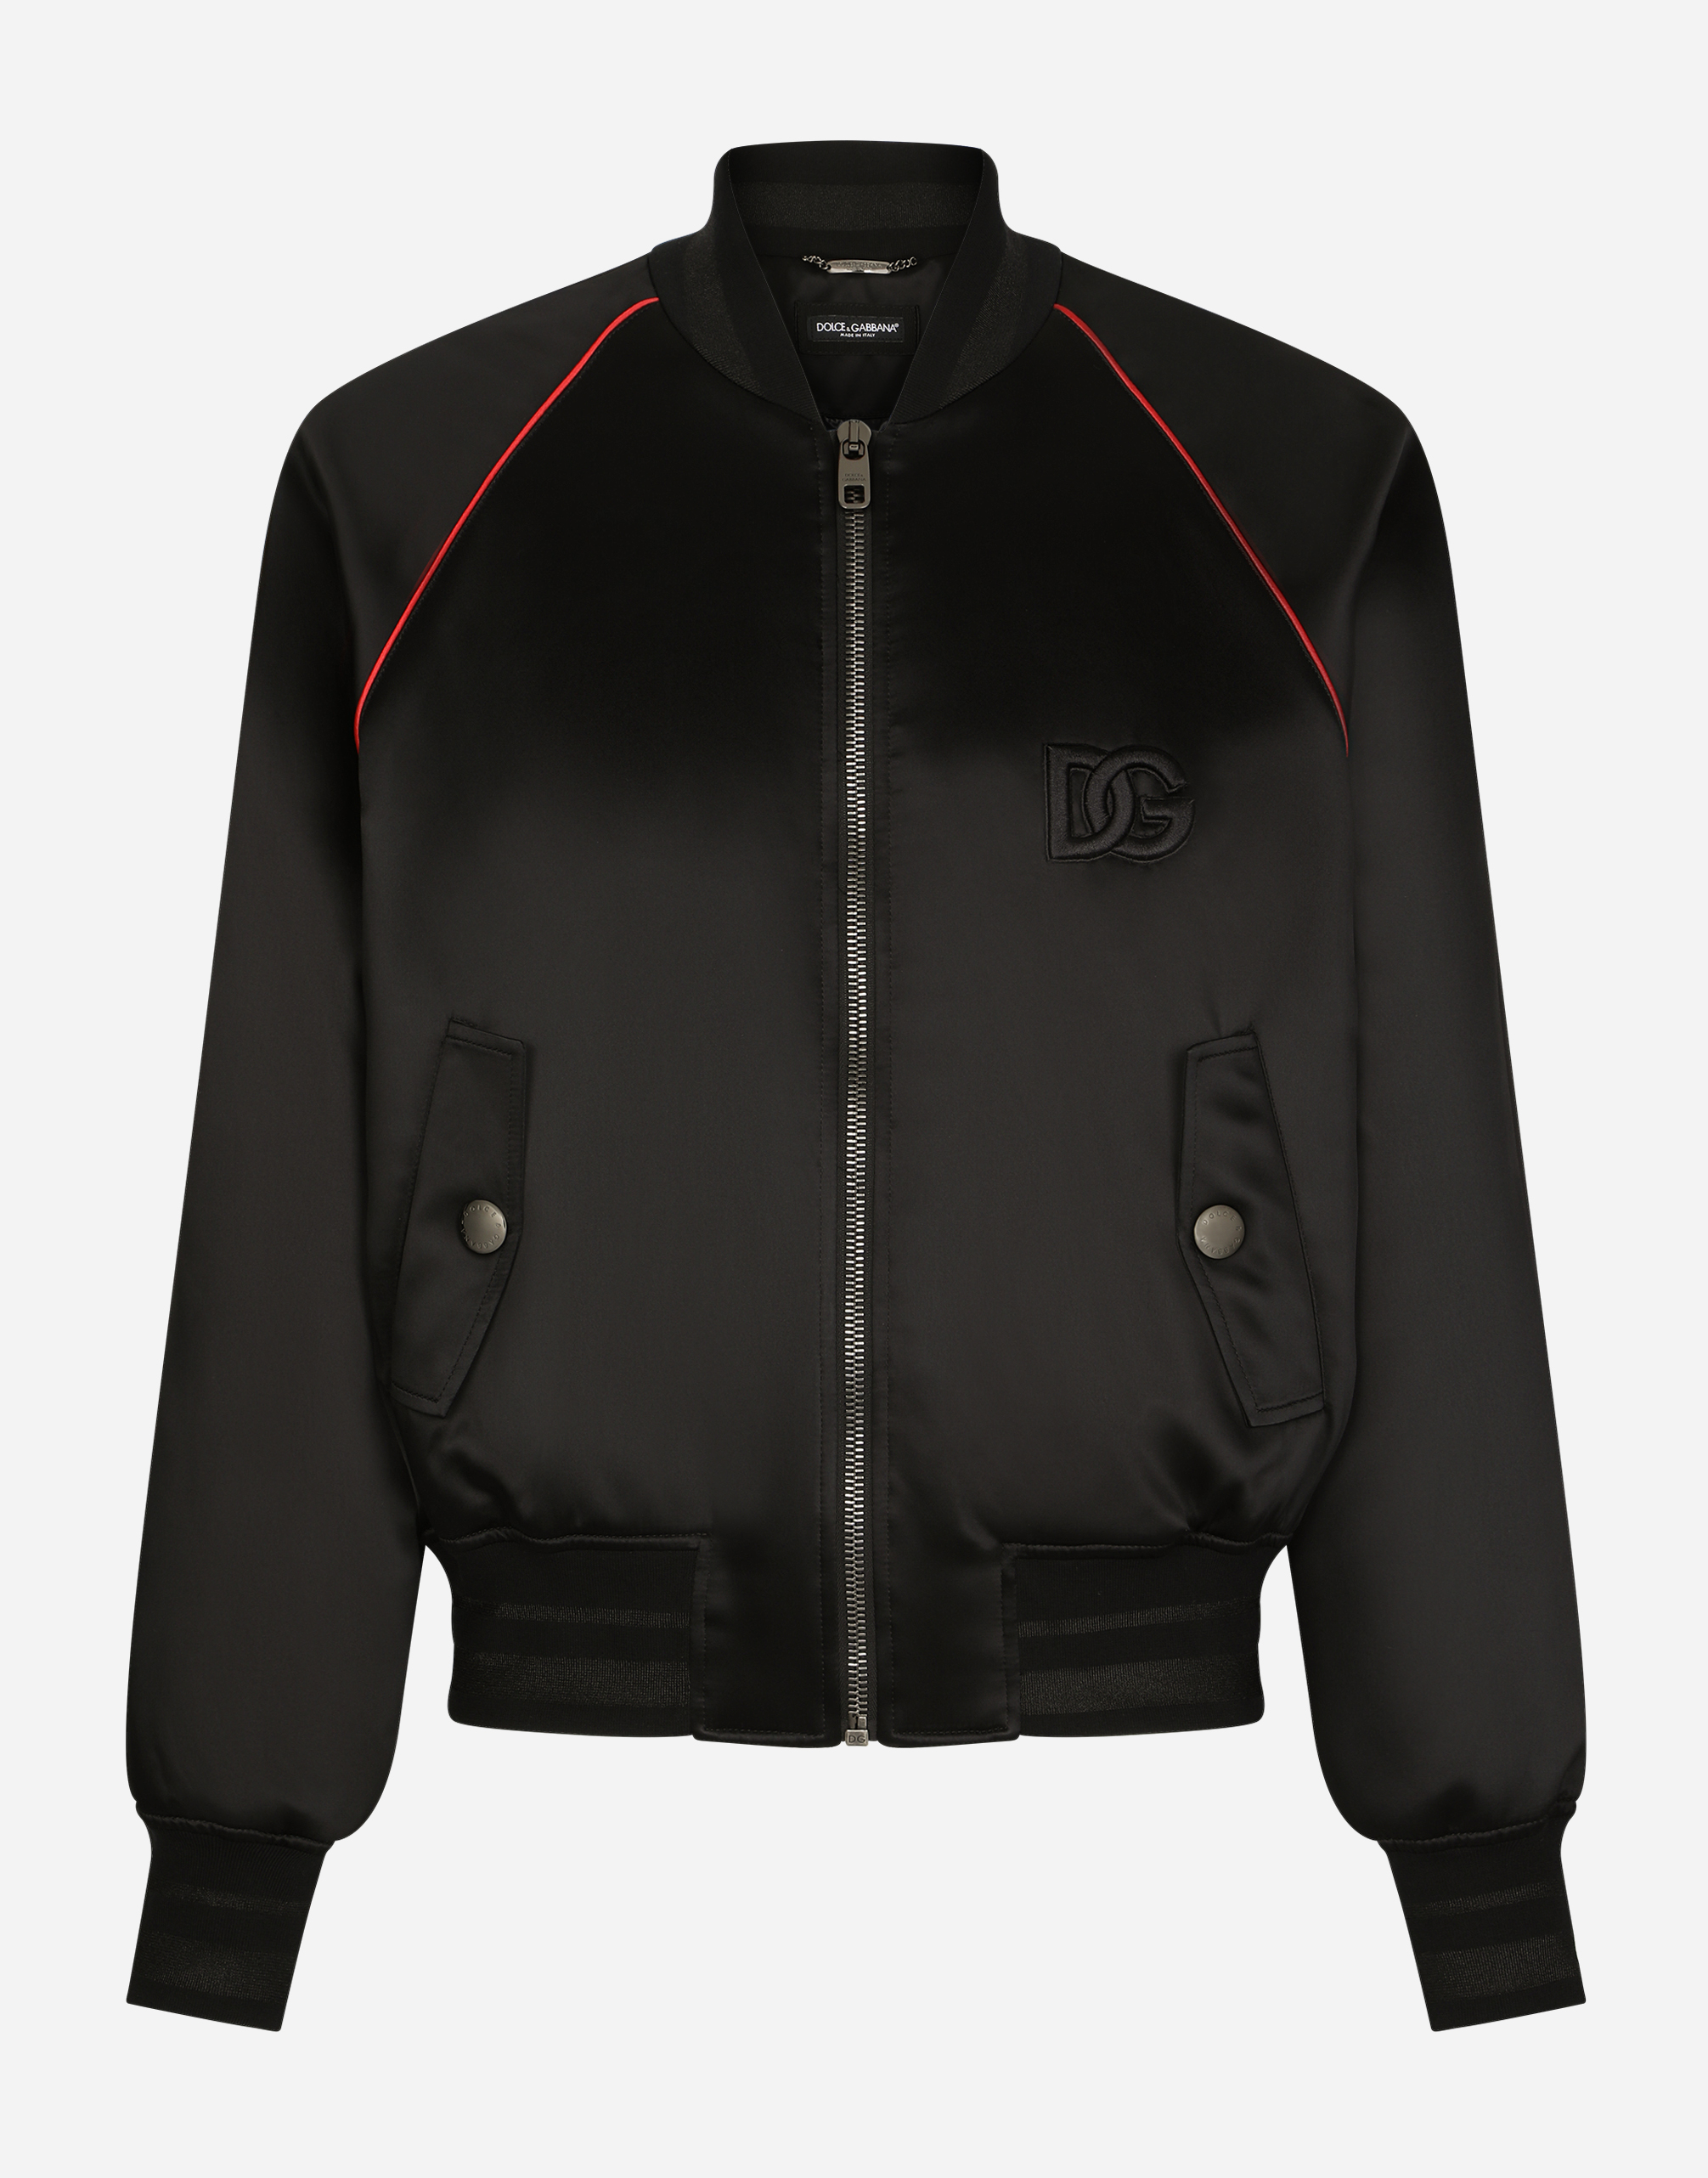 Dolce & Gabbana Satin Jacket With Embroidered Dg Patch In Black